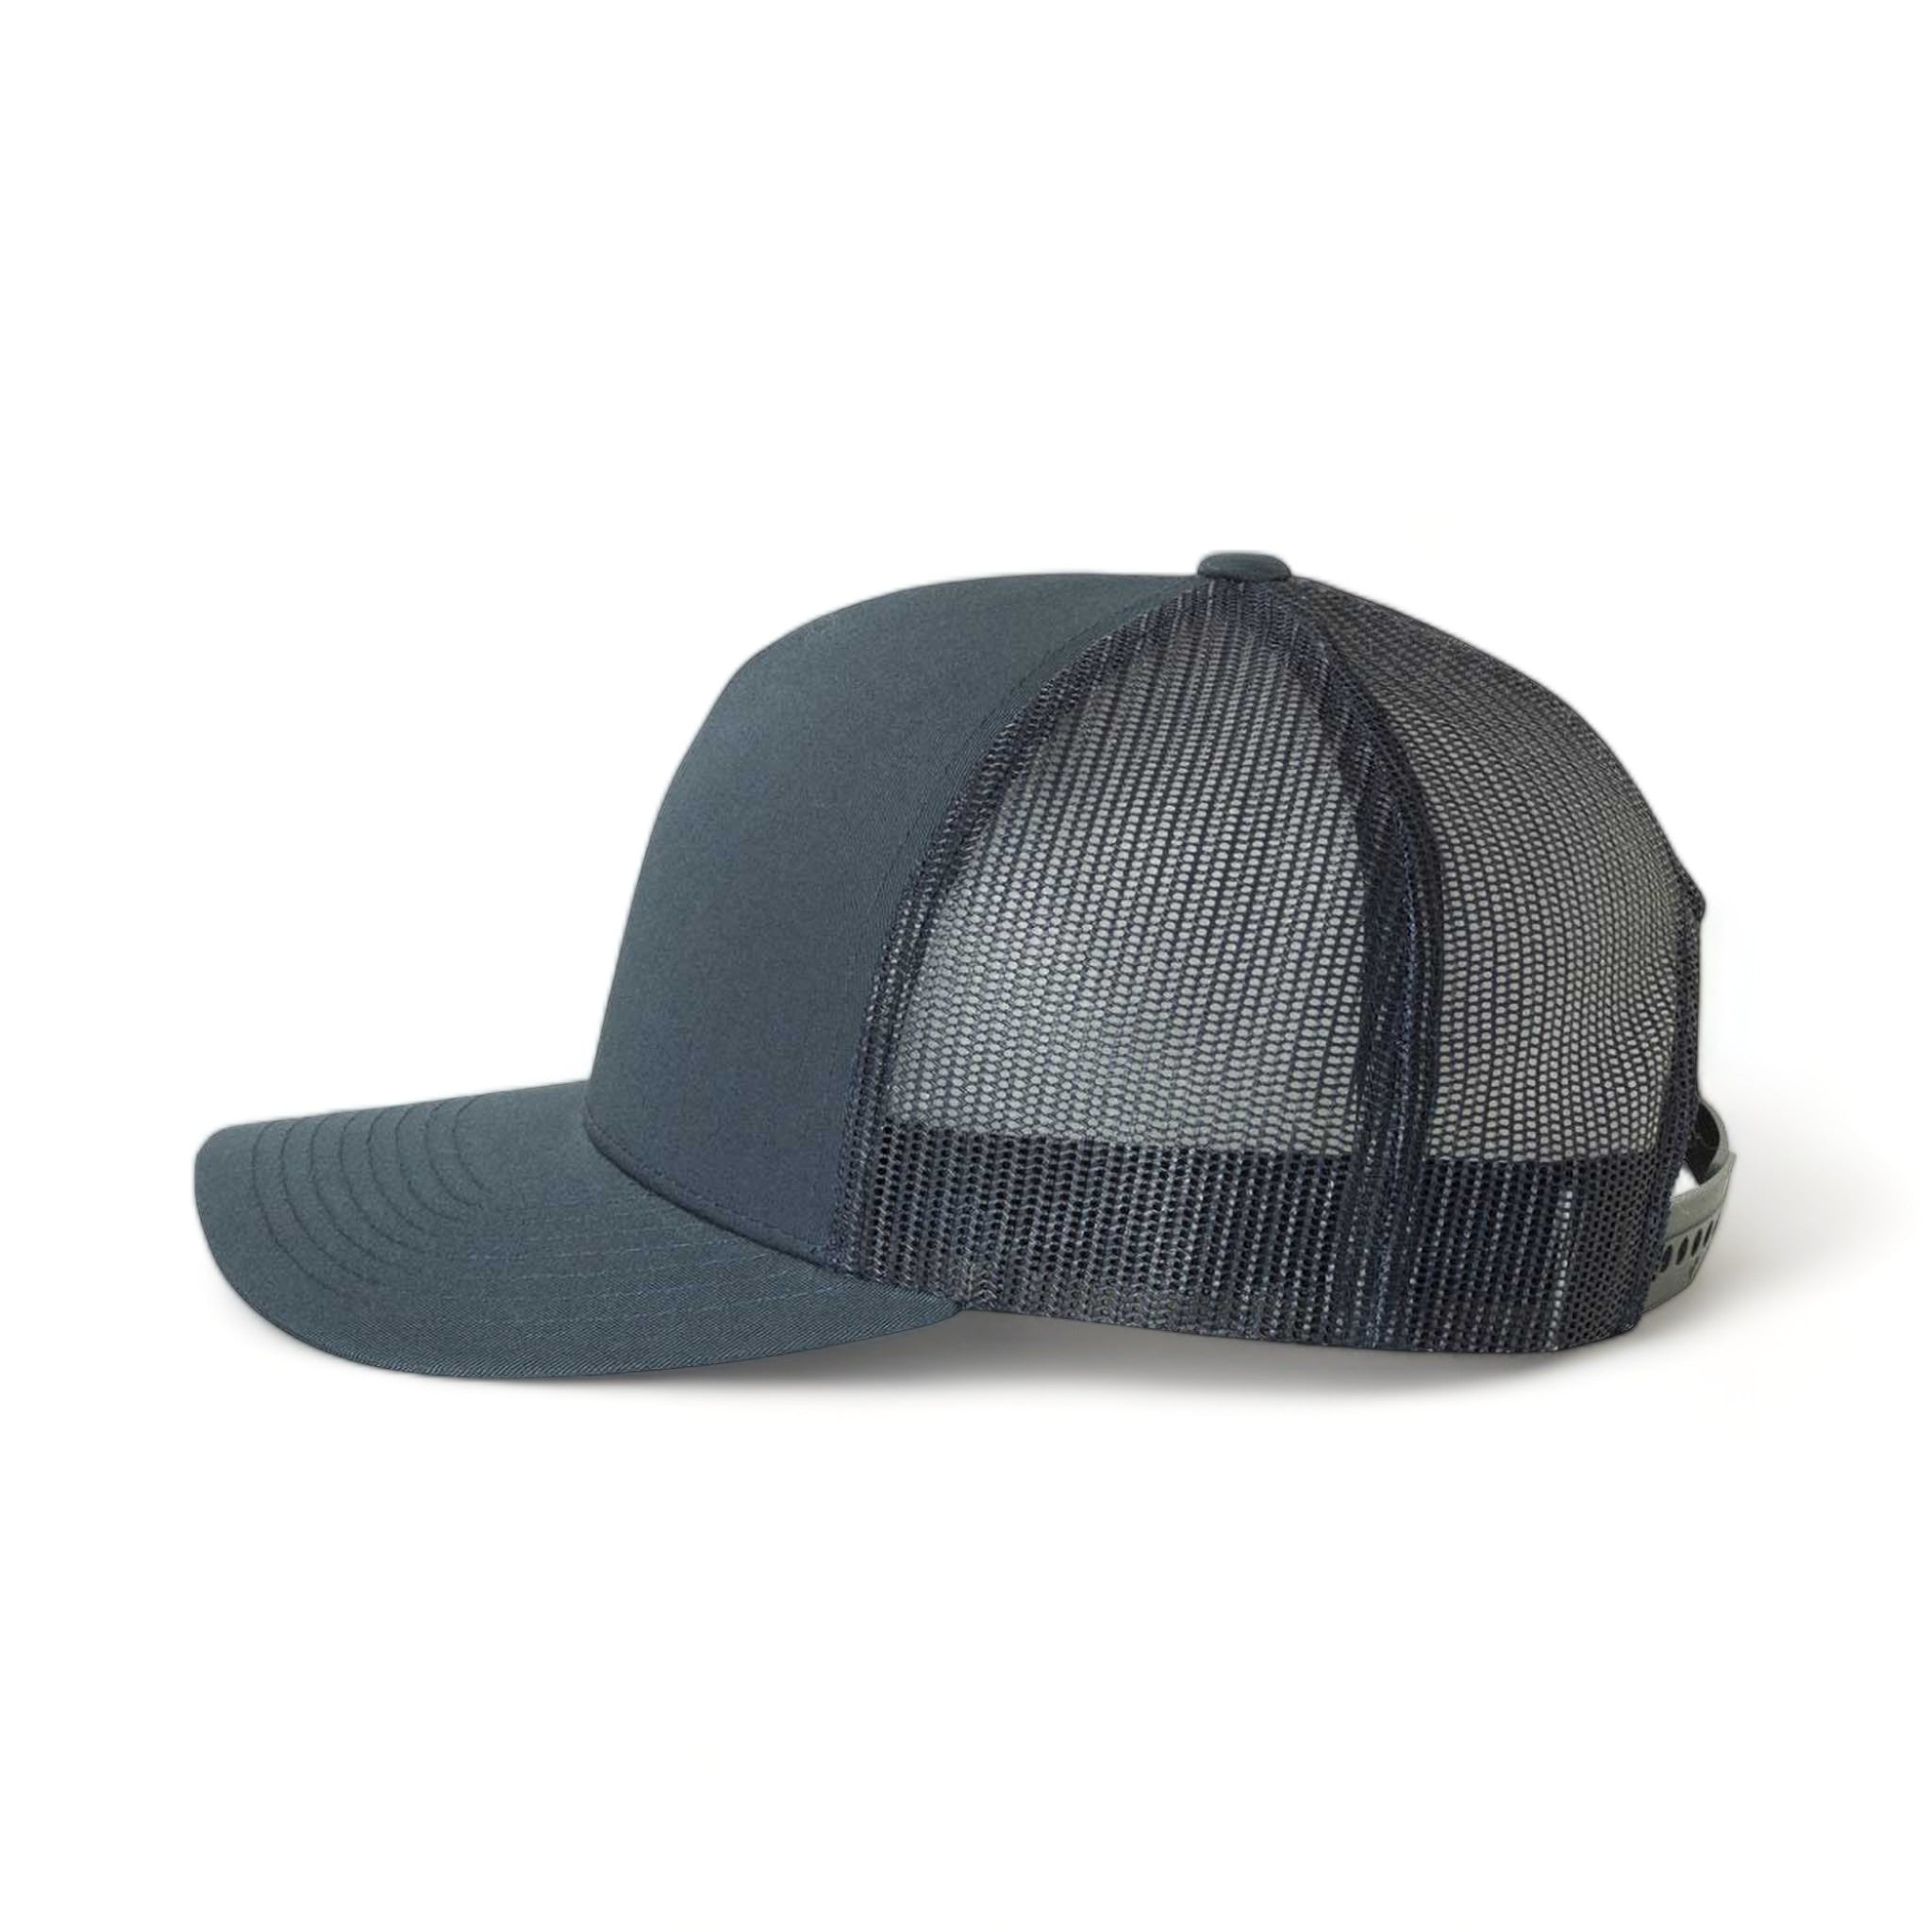 Side view of YP Classics 6506 custom hat in navy